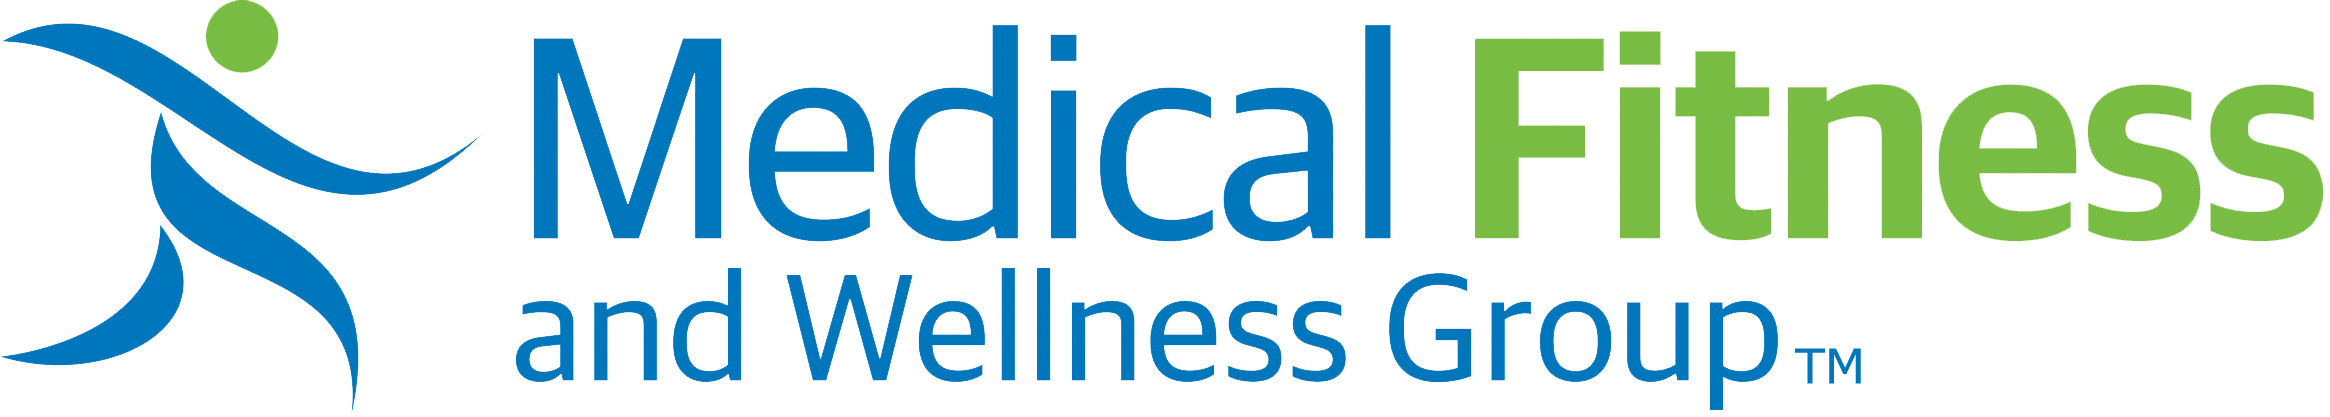 Medical Fitness and wellness Group